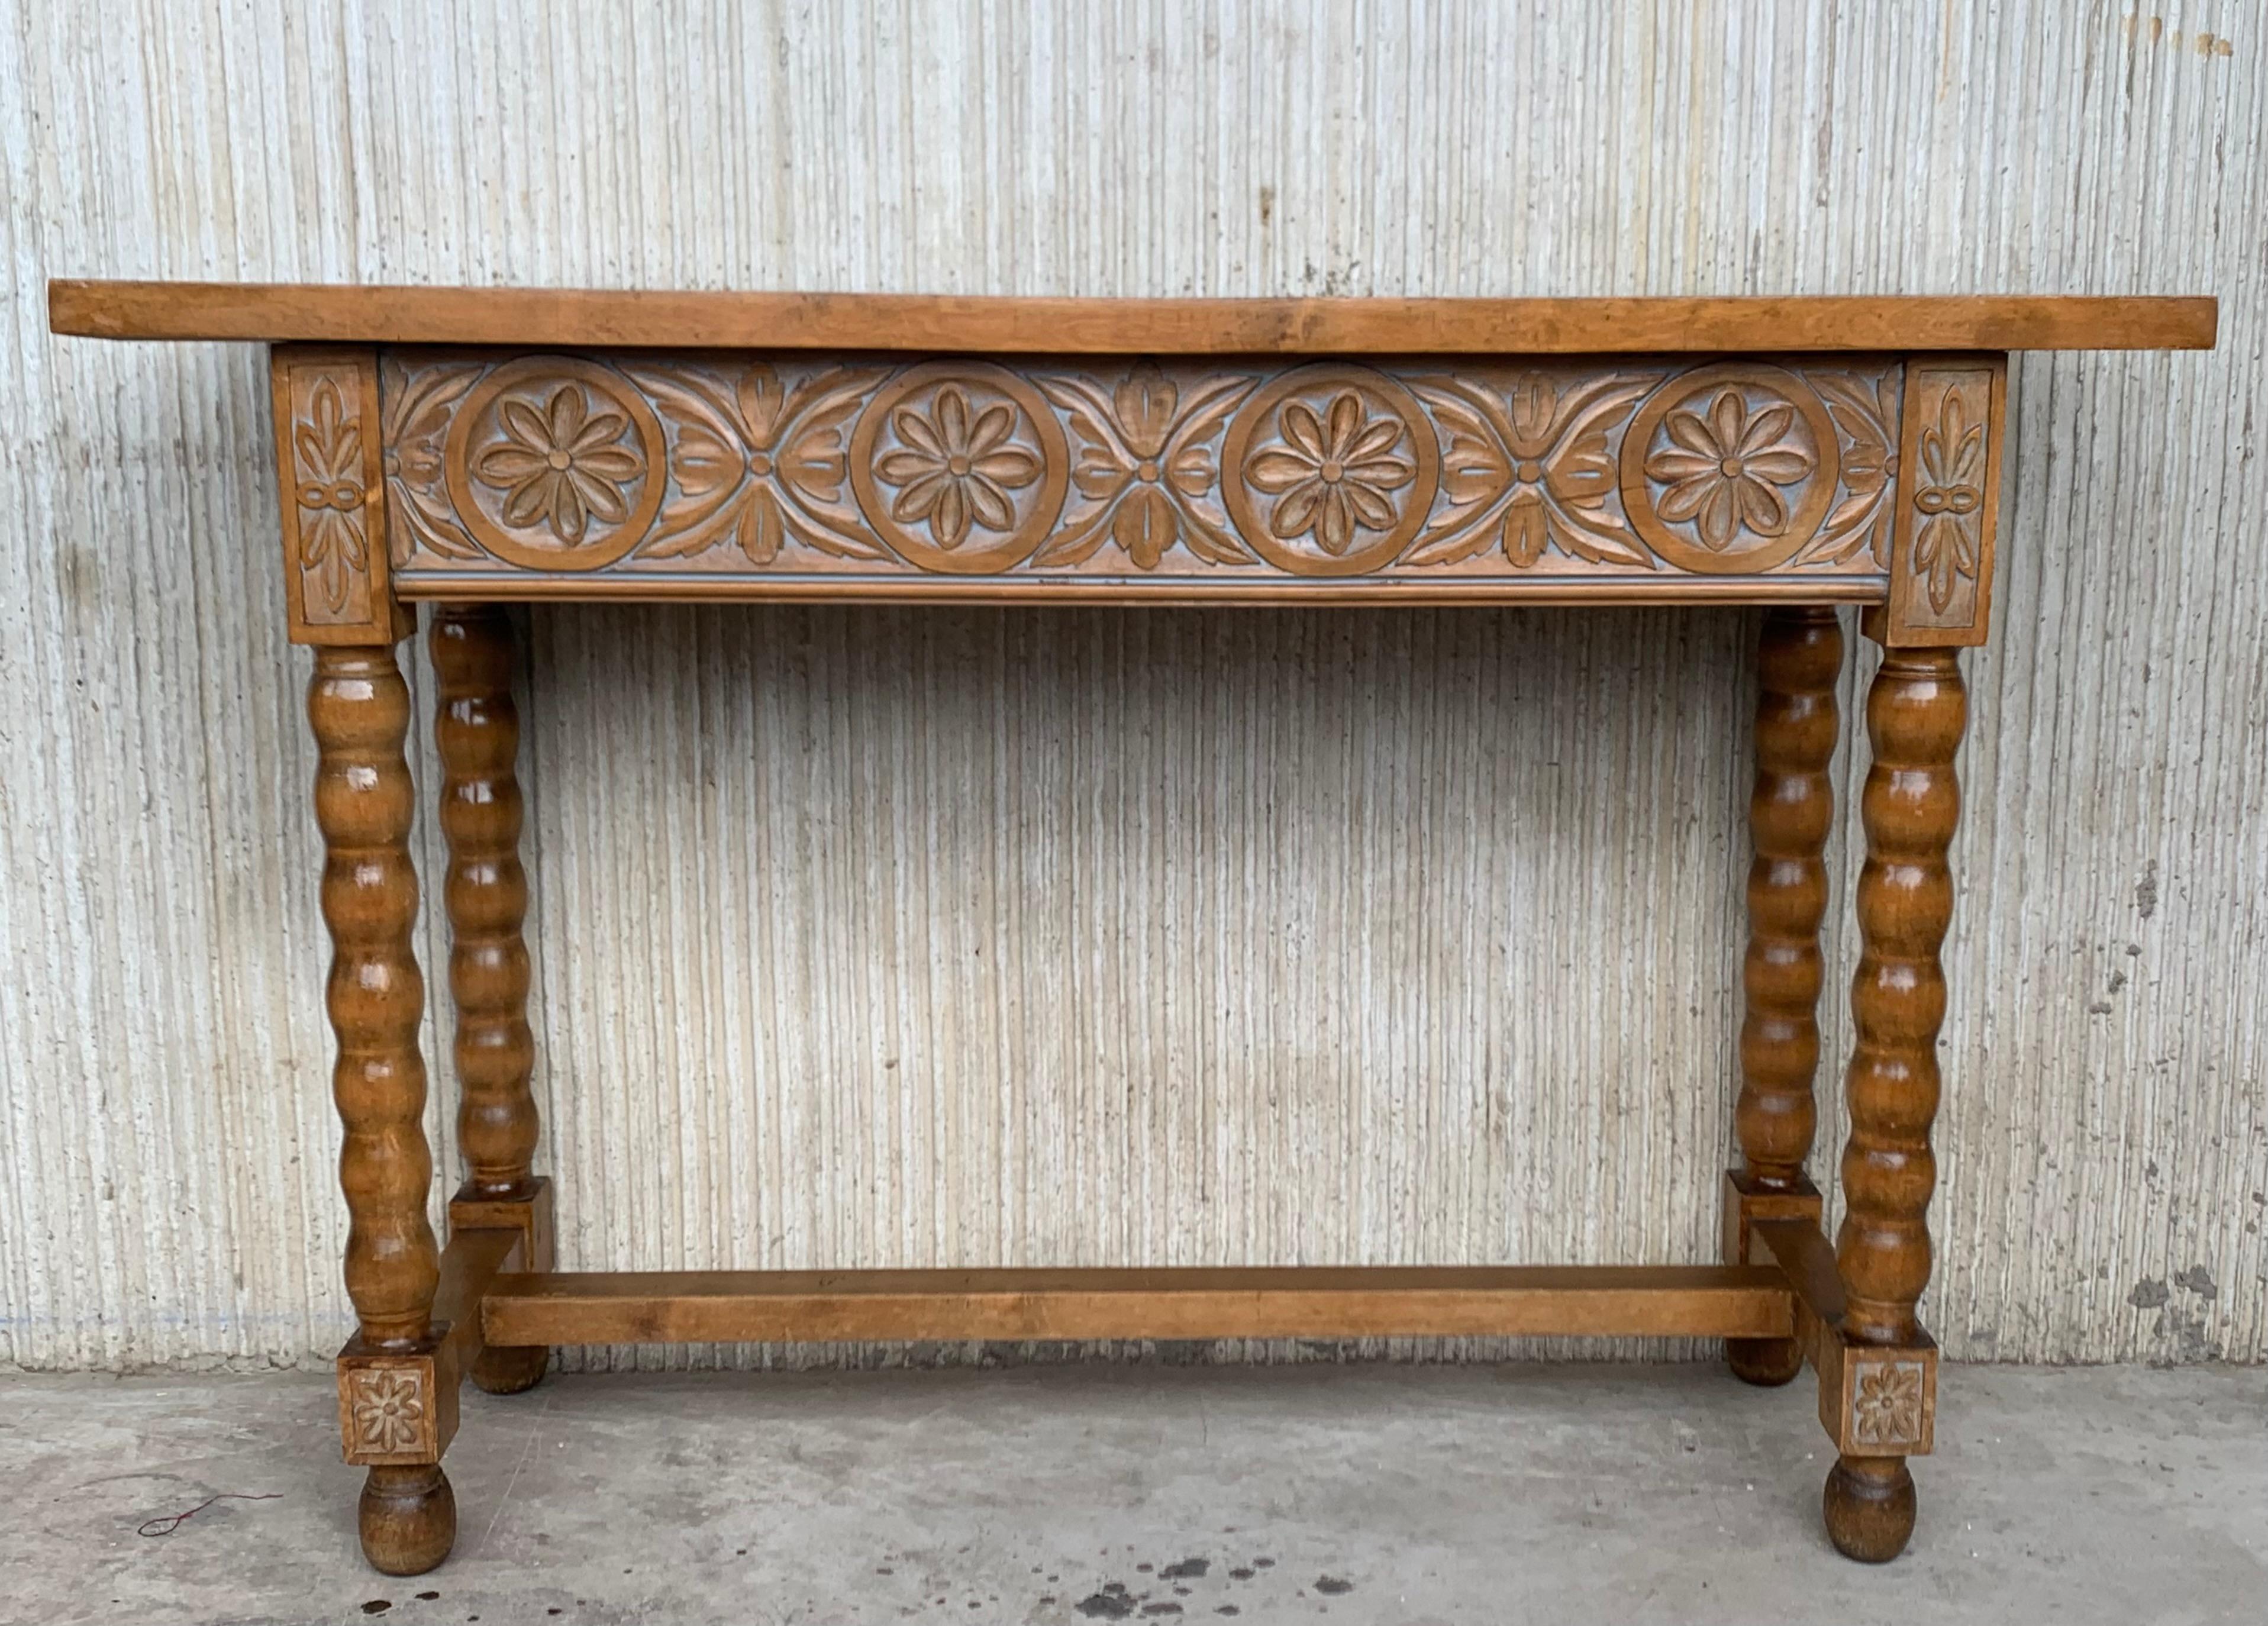 Baroque Early 20th Century Spanish Carved Console Table with Turned Legs